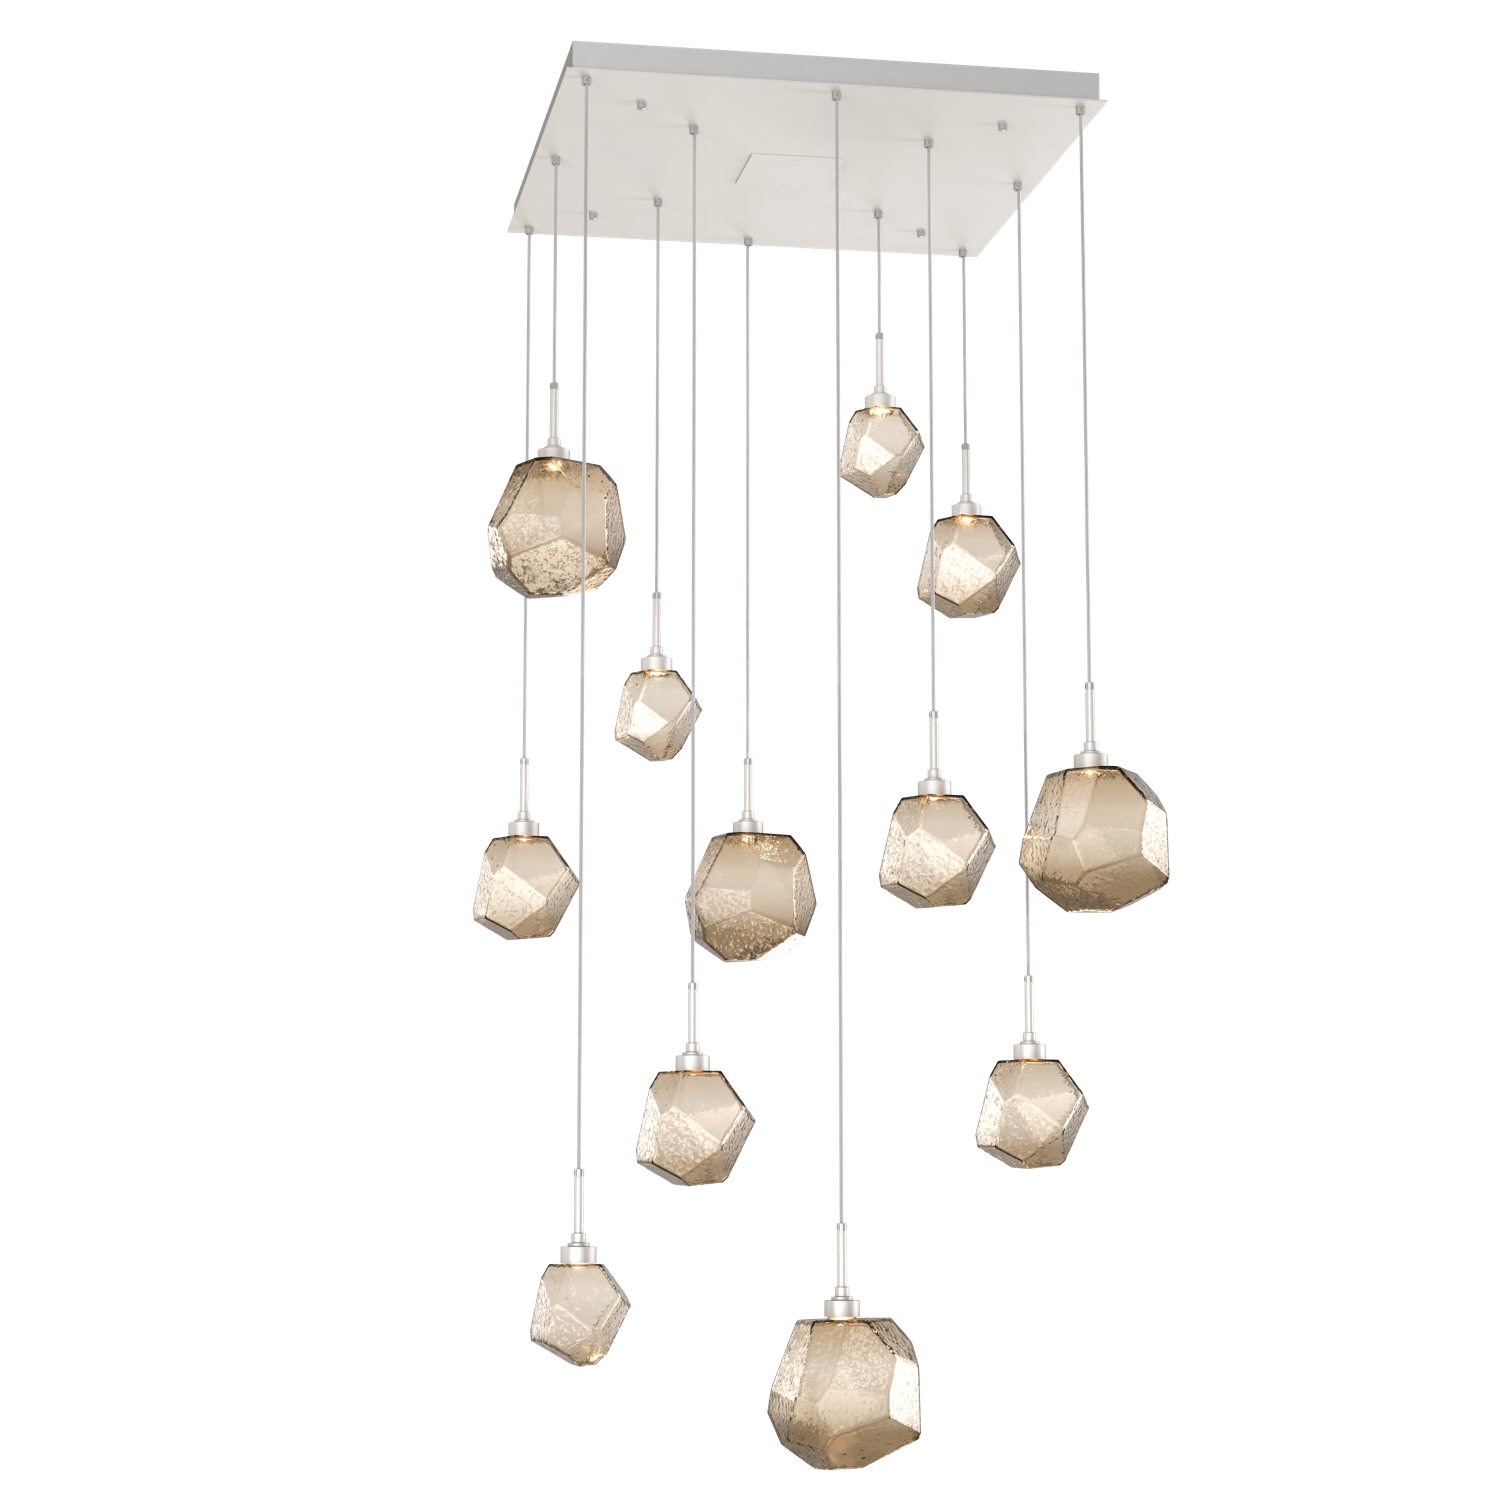 CHB0039-12-BS-B-Hammerton-Studio-Gem-12-light-square-pendant-chandelier-with-metallic-beige-silver-finish-and-bronze-blown-glass-shades-and-LED-lamping